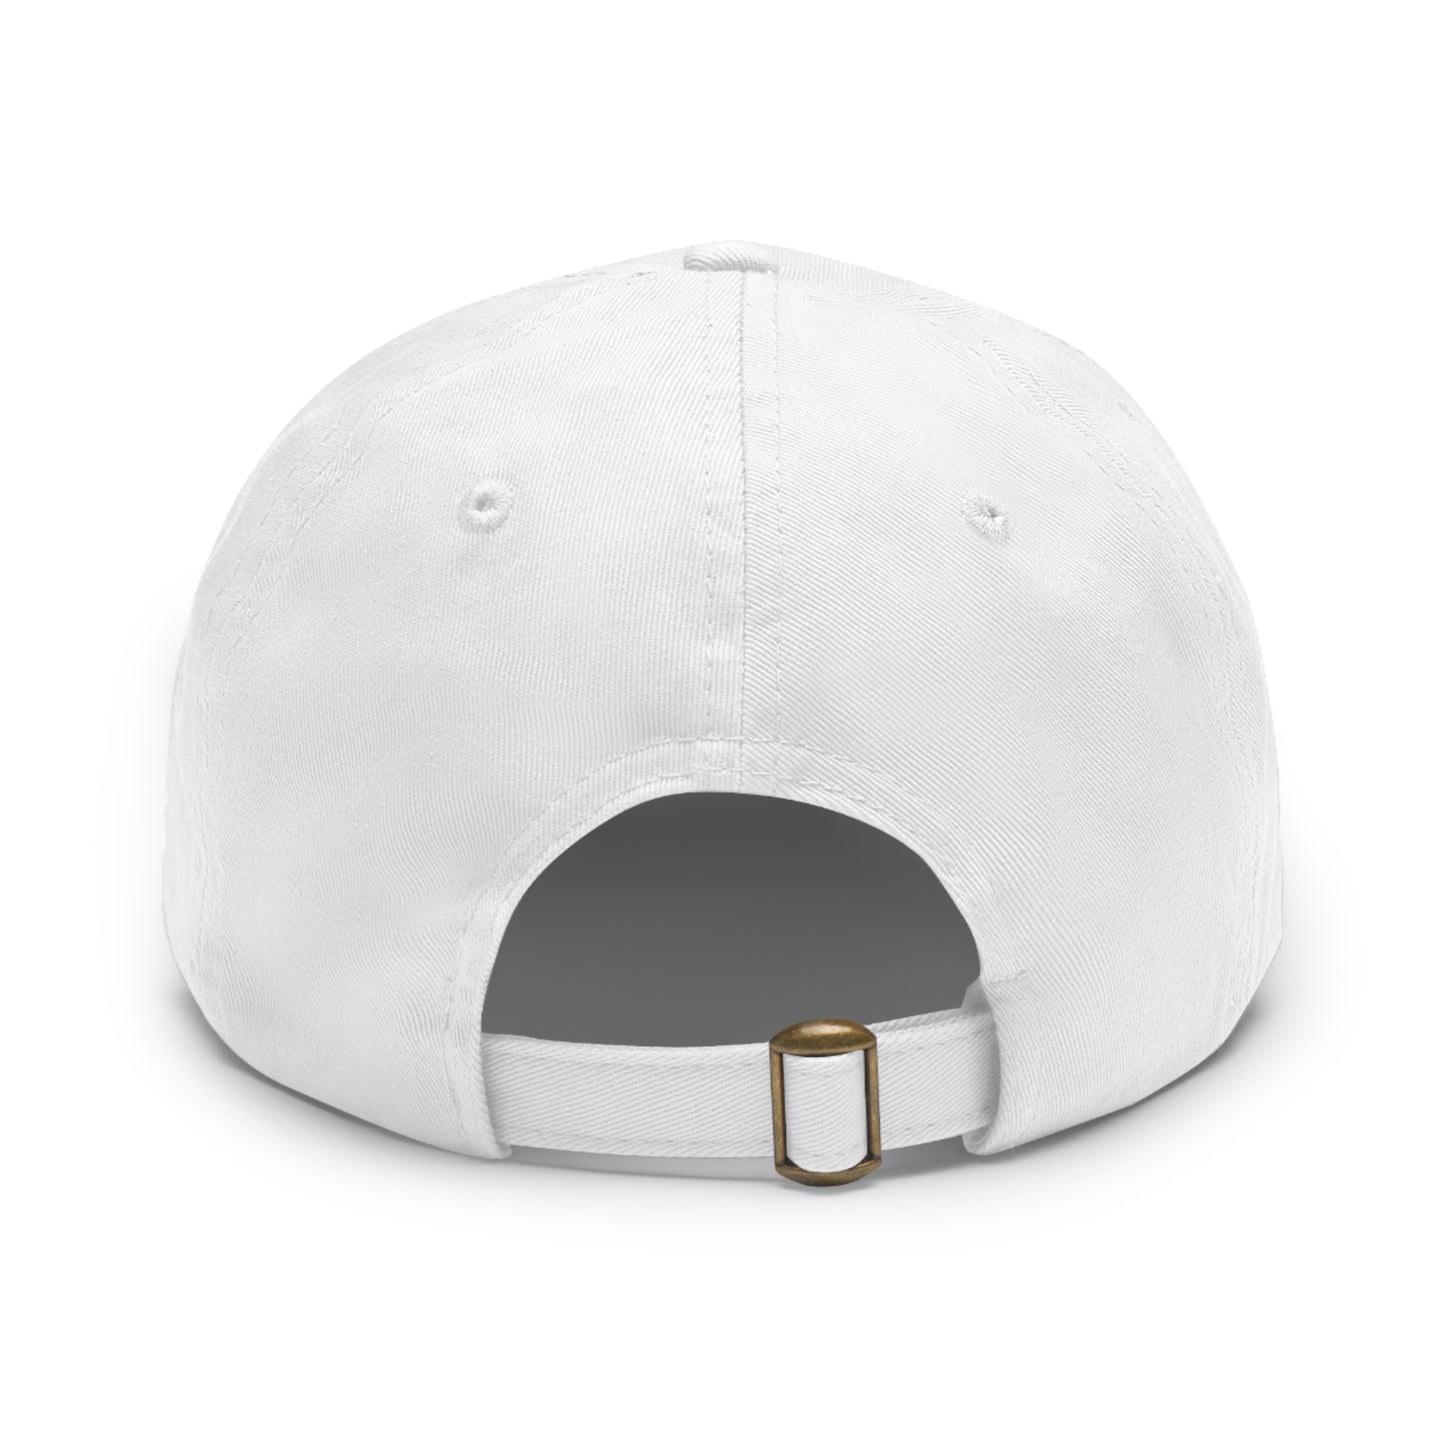 Toss & Fetch - Vancouver, WA Dad Hat with Leather Patch (Rectangle)